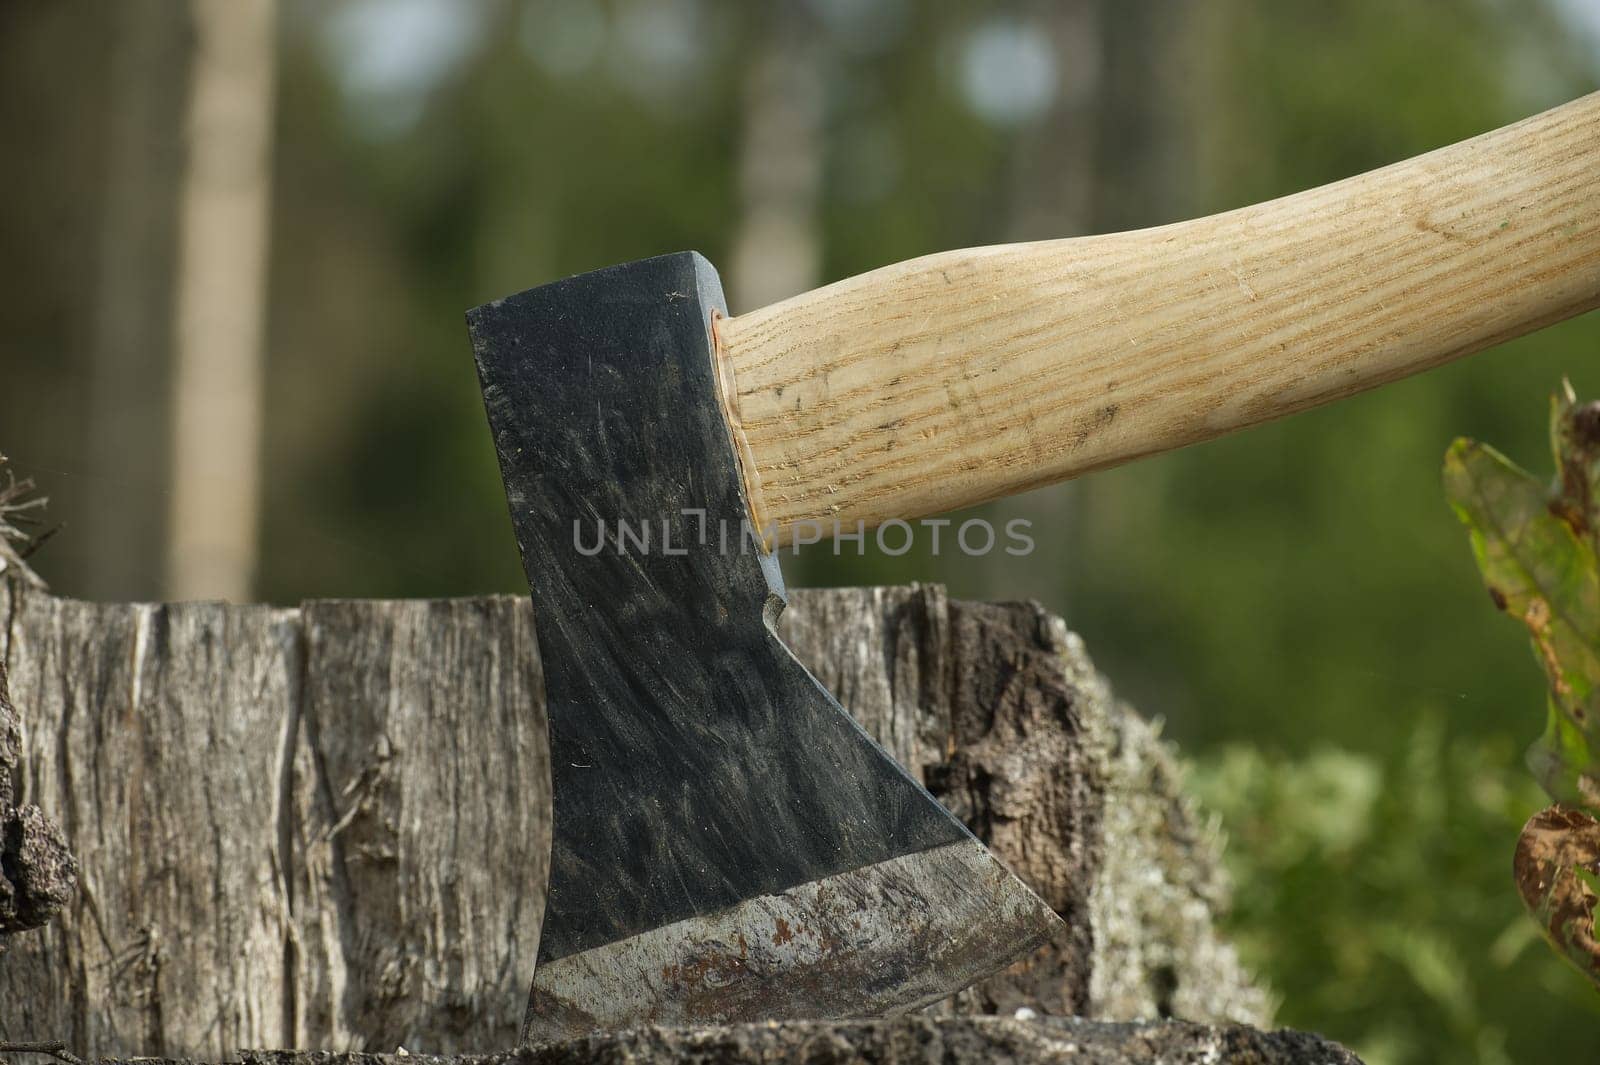 Hatchet or axe stuck in a tree stump against forest by NetPix